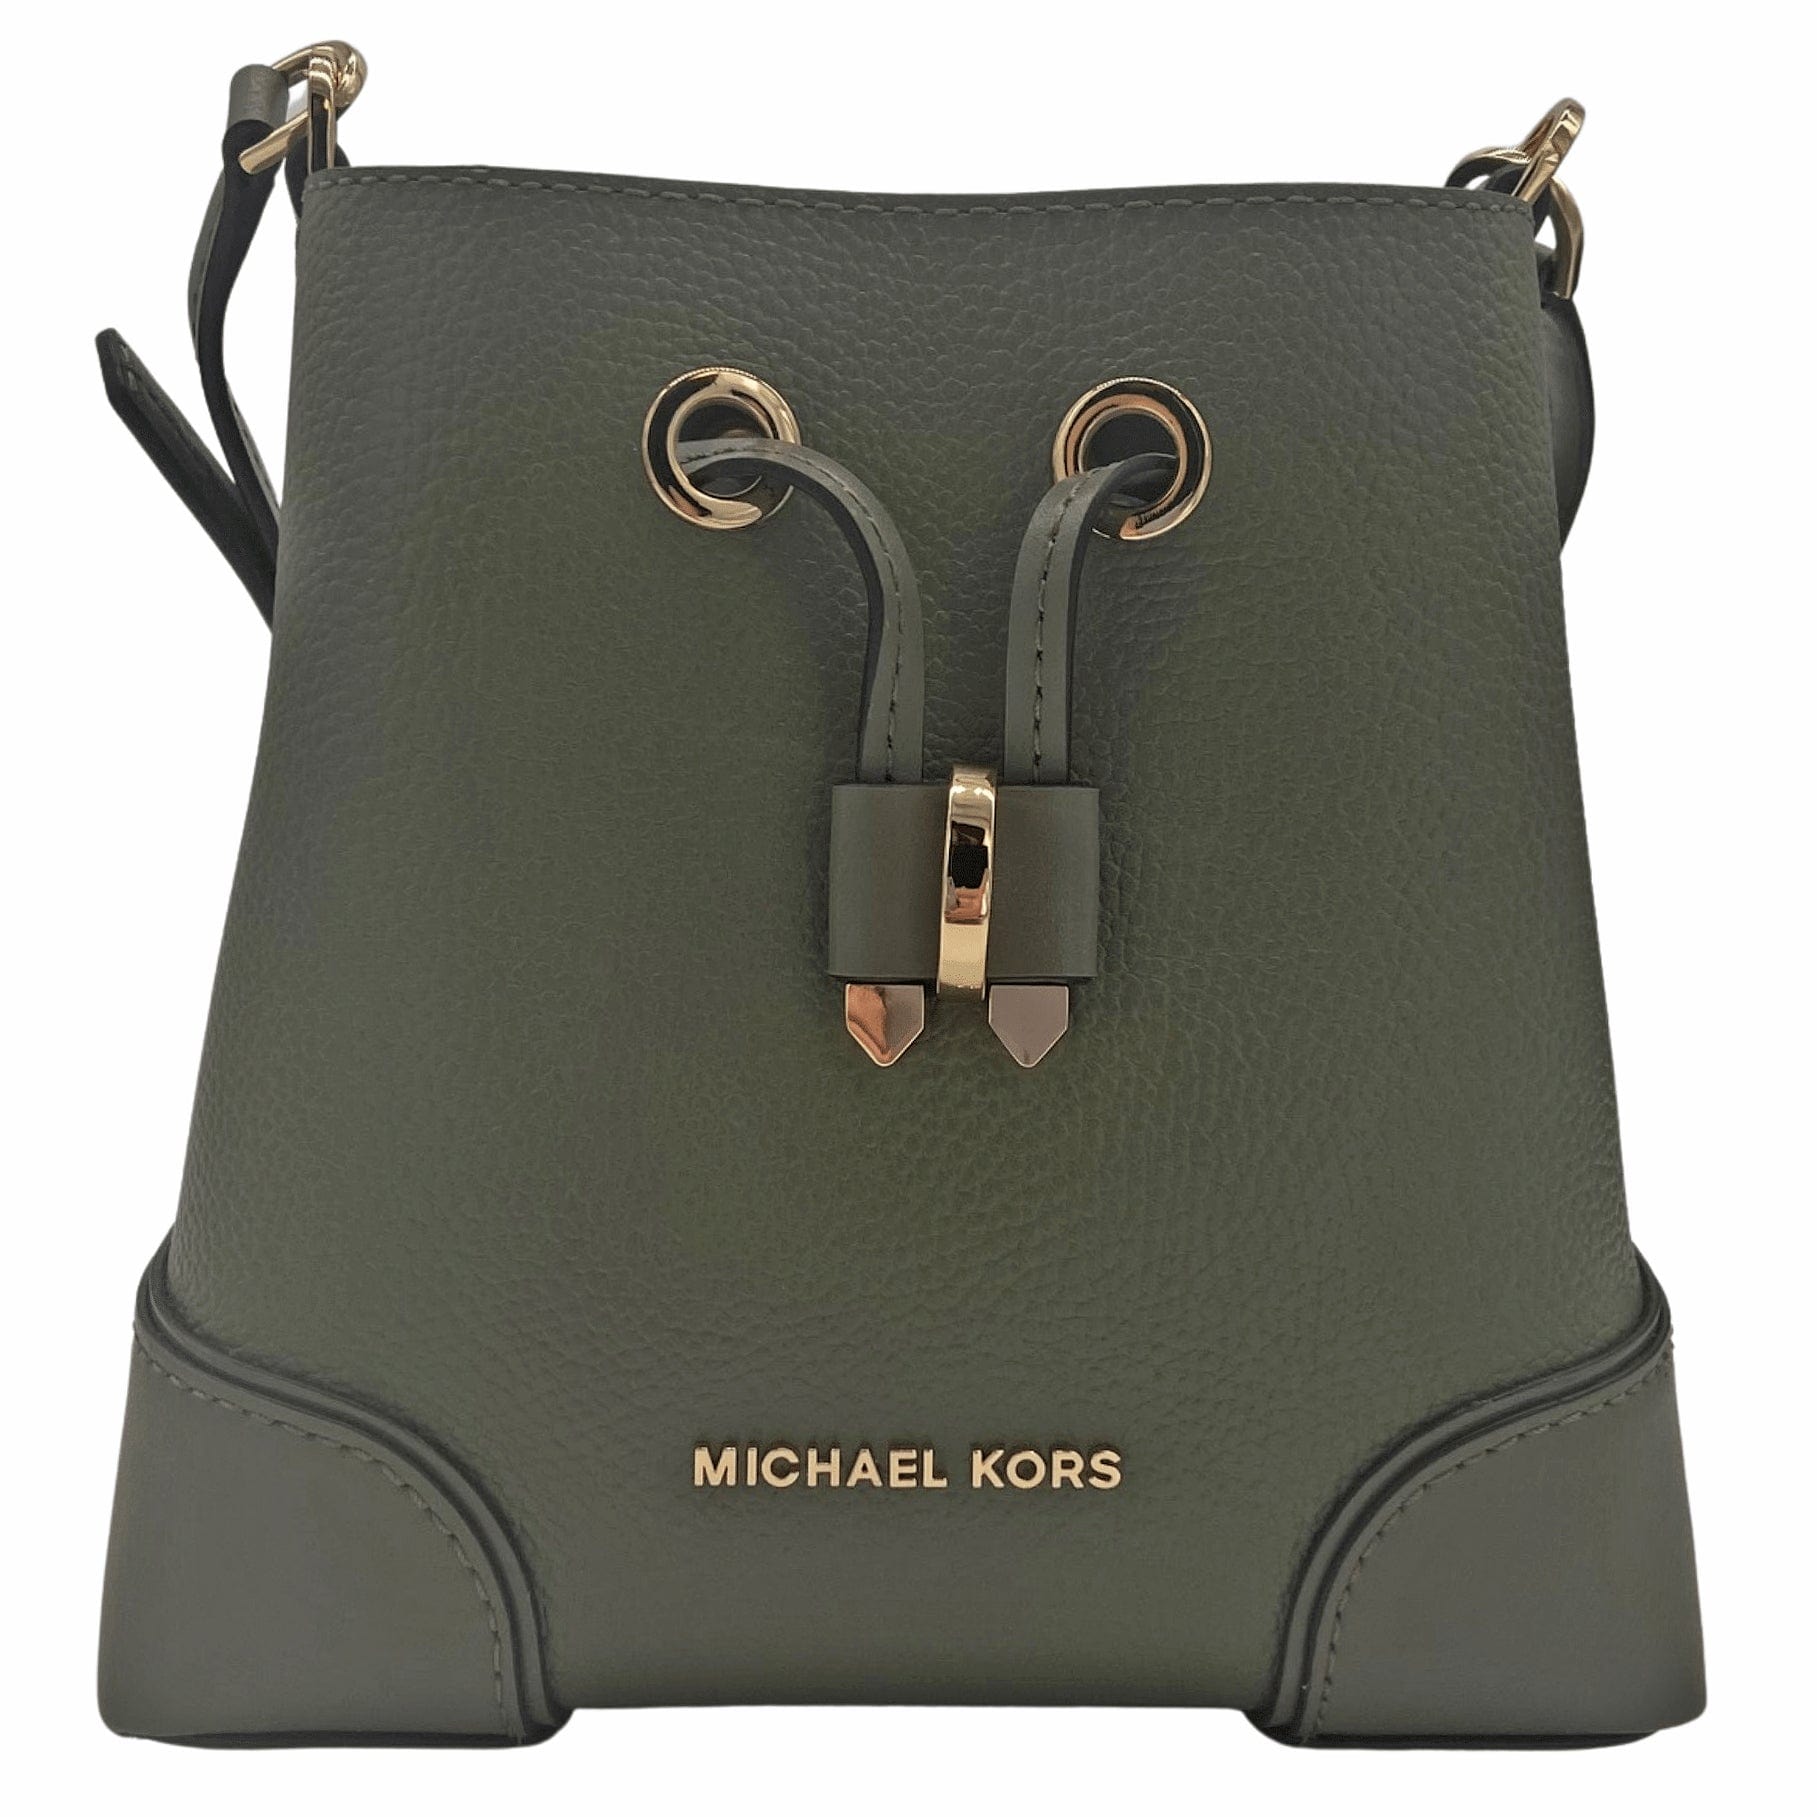 Michael Kors Mercer Gallery Extra-Small Pebbled Leather Crossbody - Olive New W/Tags